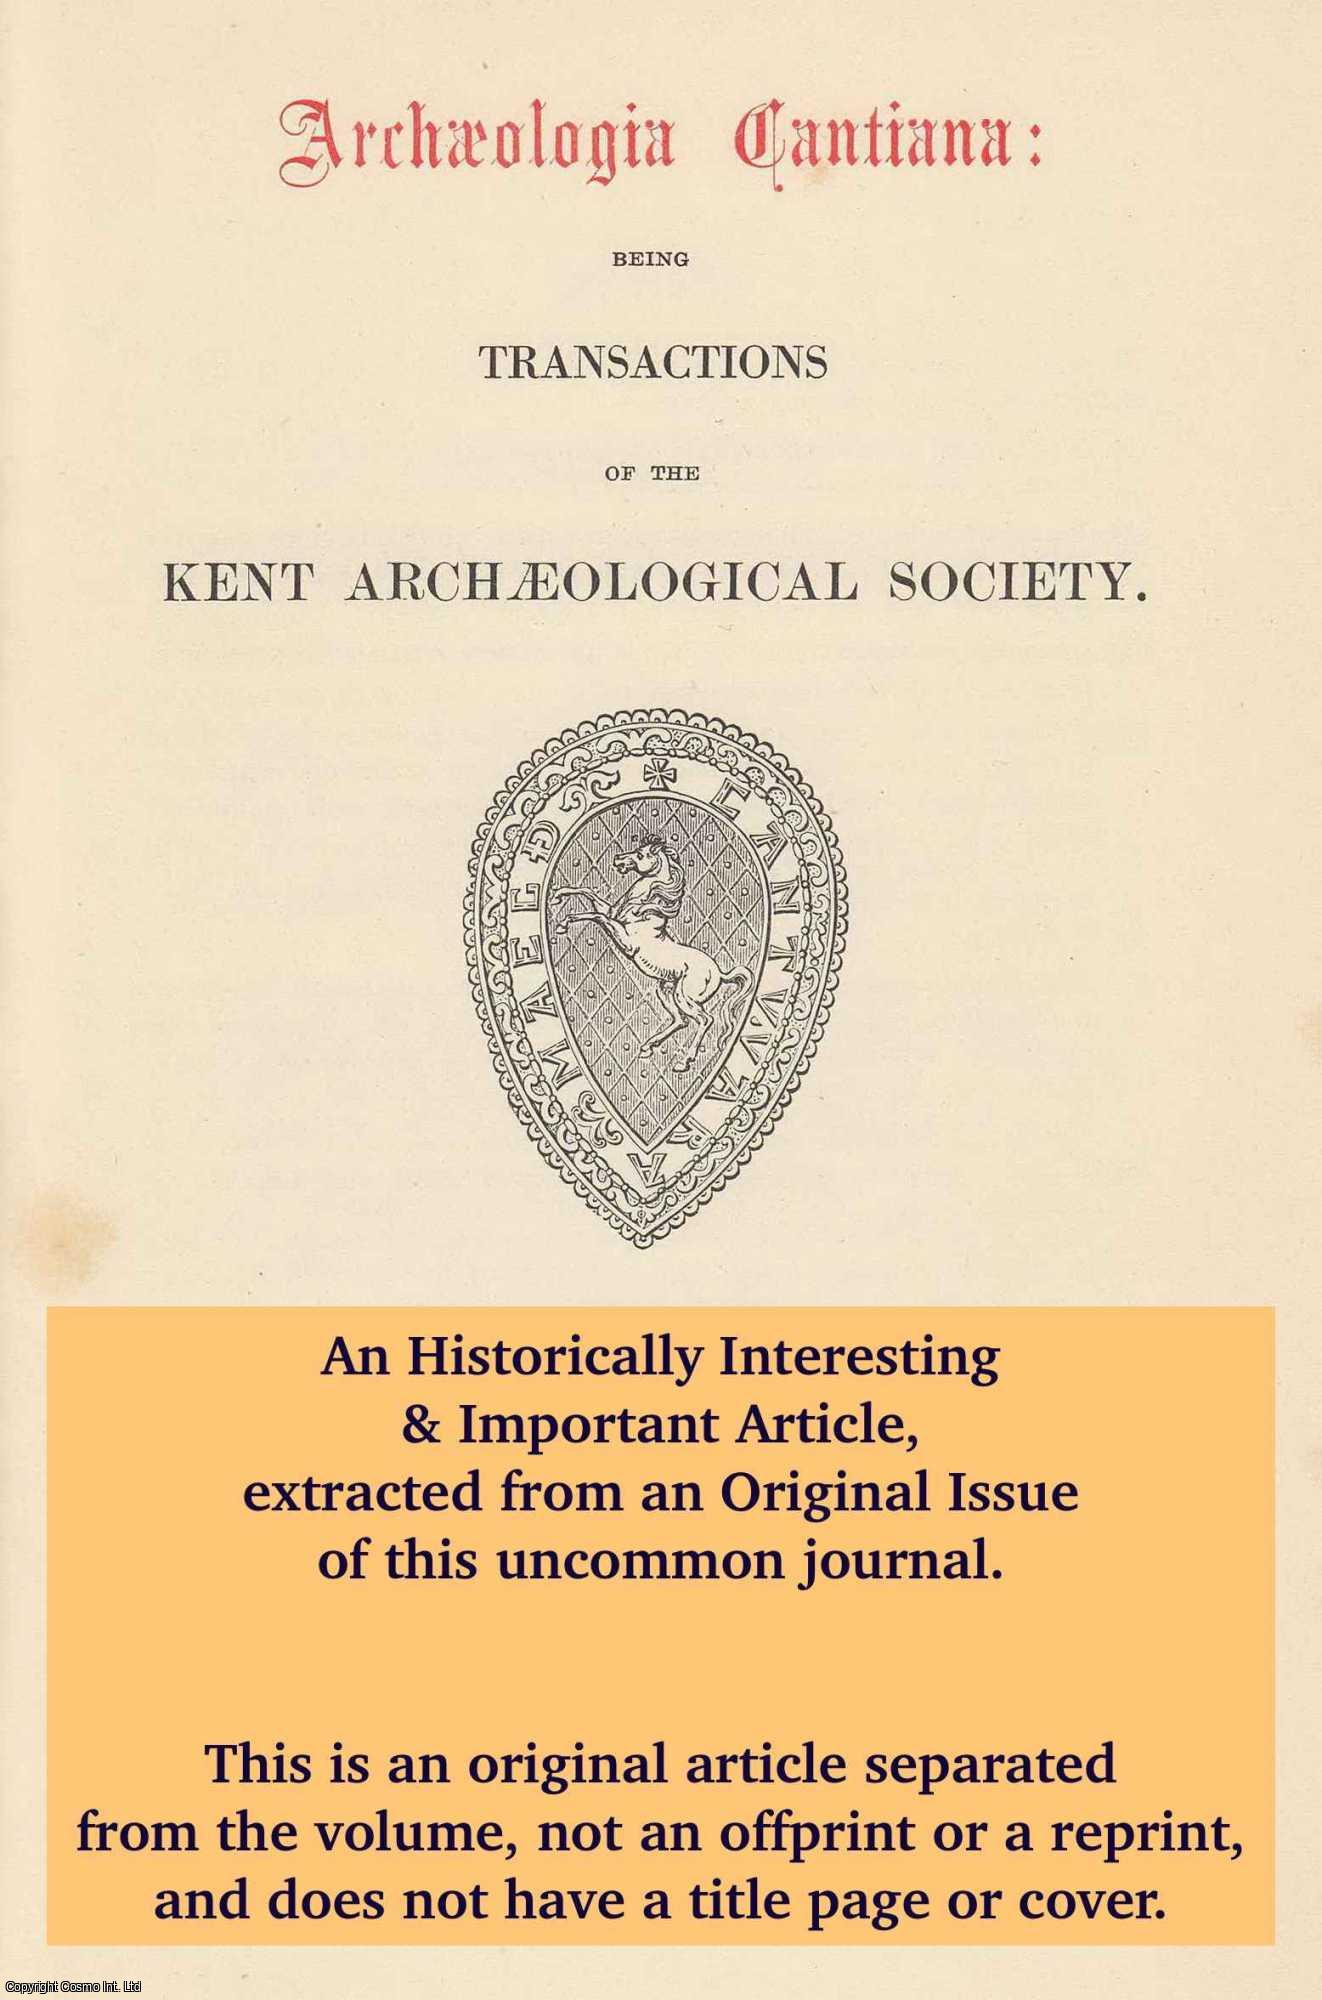 No Author Stated - Researches and Discoveries in Kent. A Pre-Conquest Sculptural Fragment from Rochester Cathedral. An original article from The Archaeologia Cantiana, 1973.